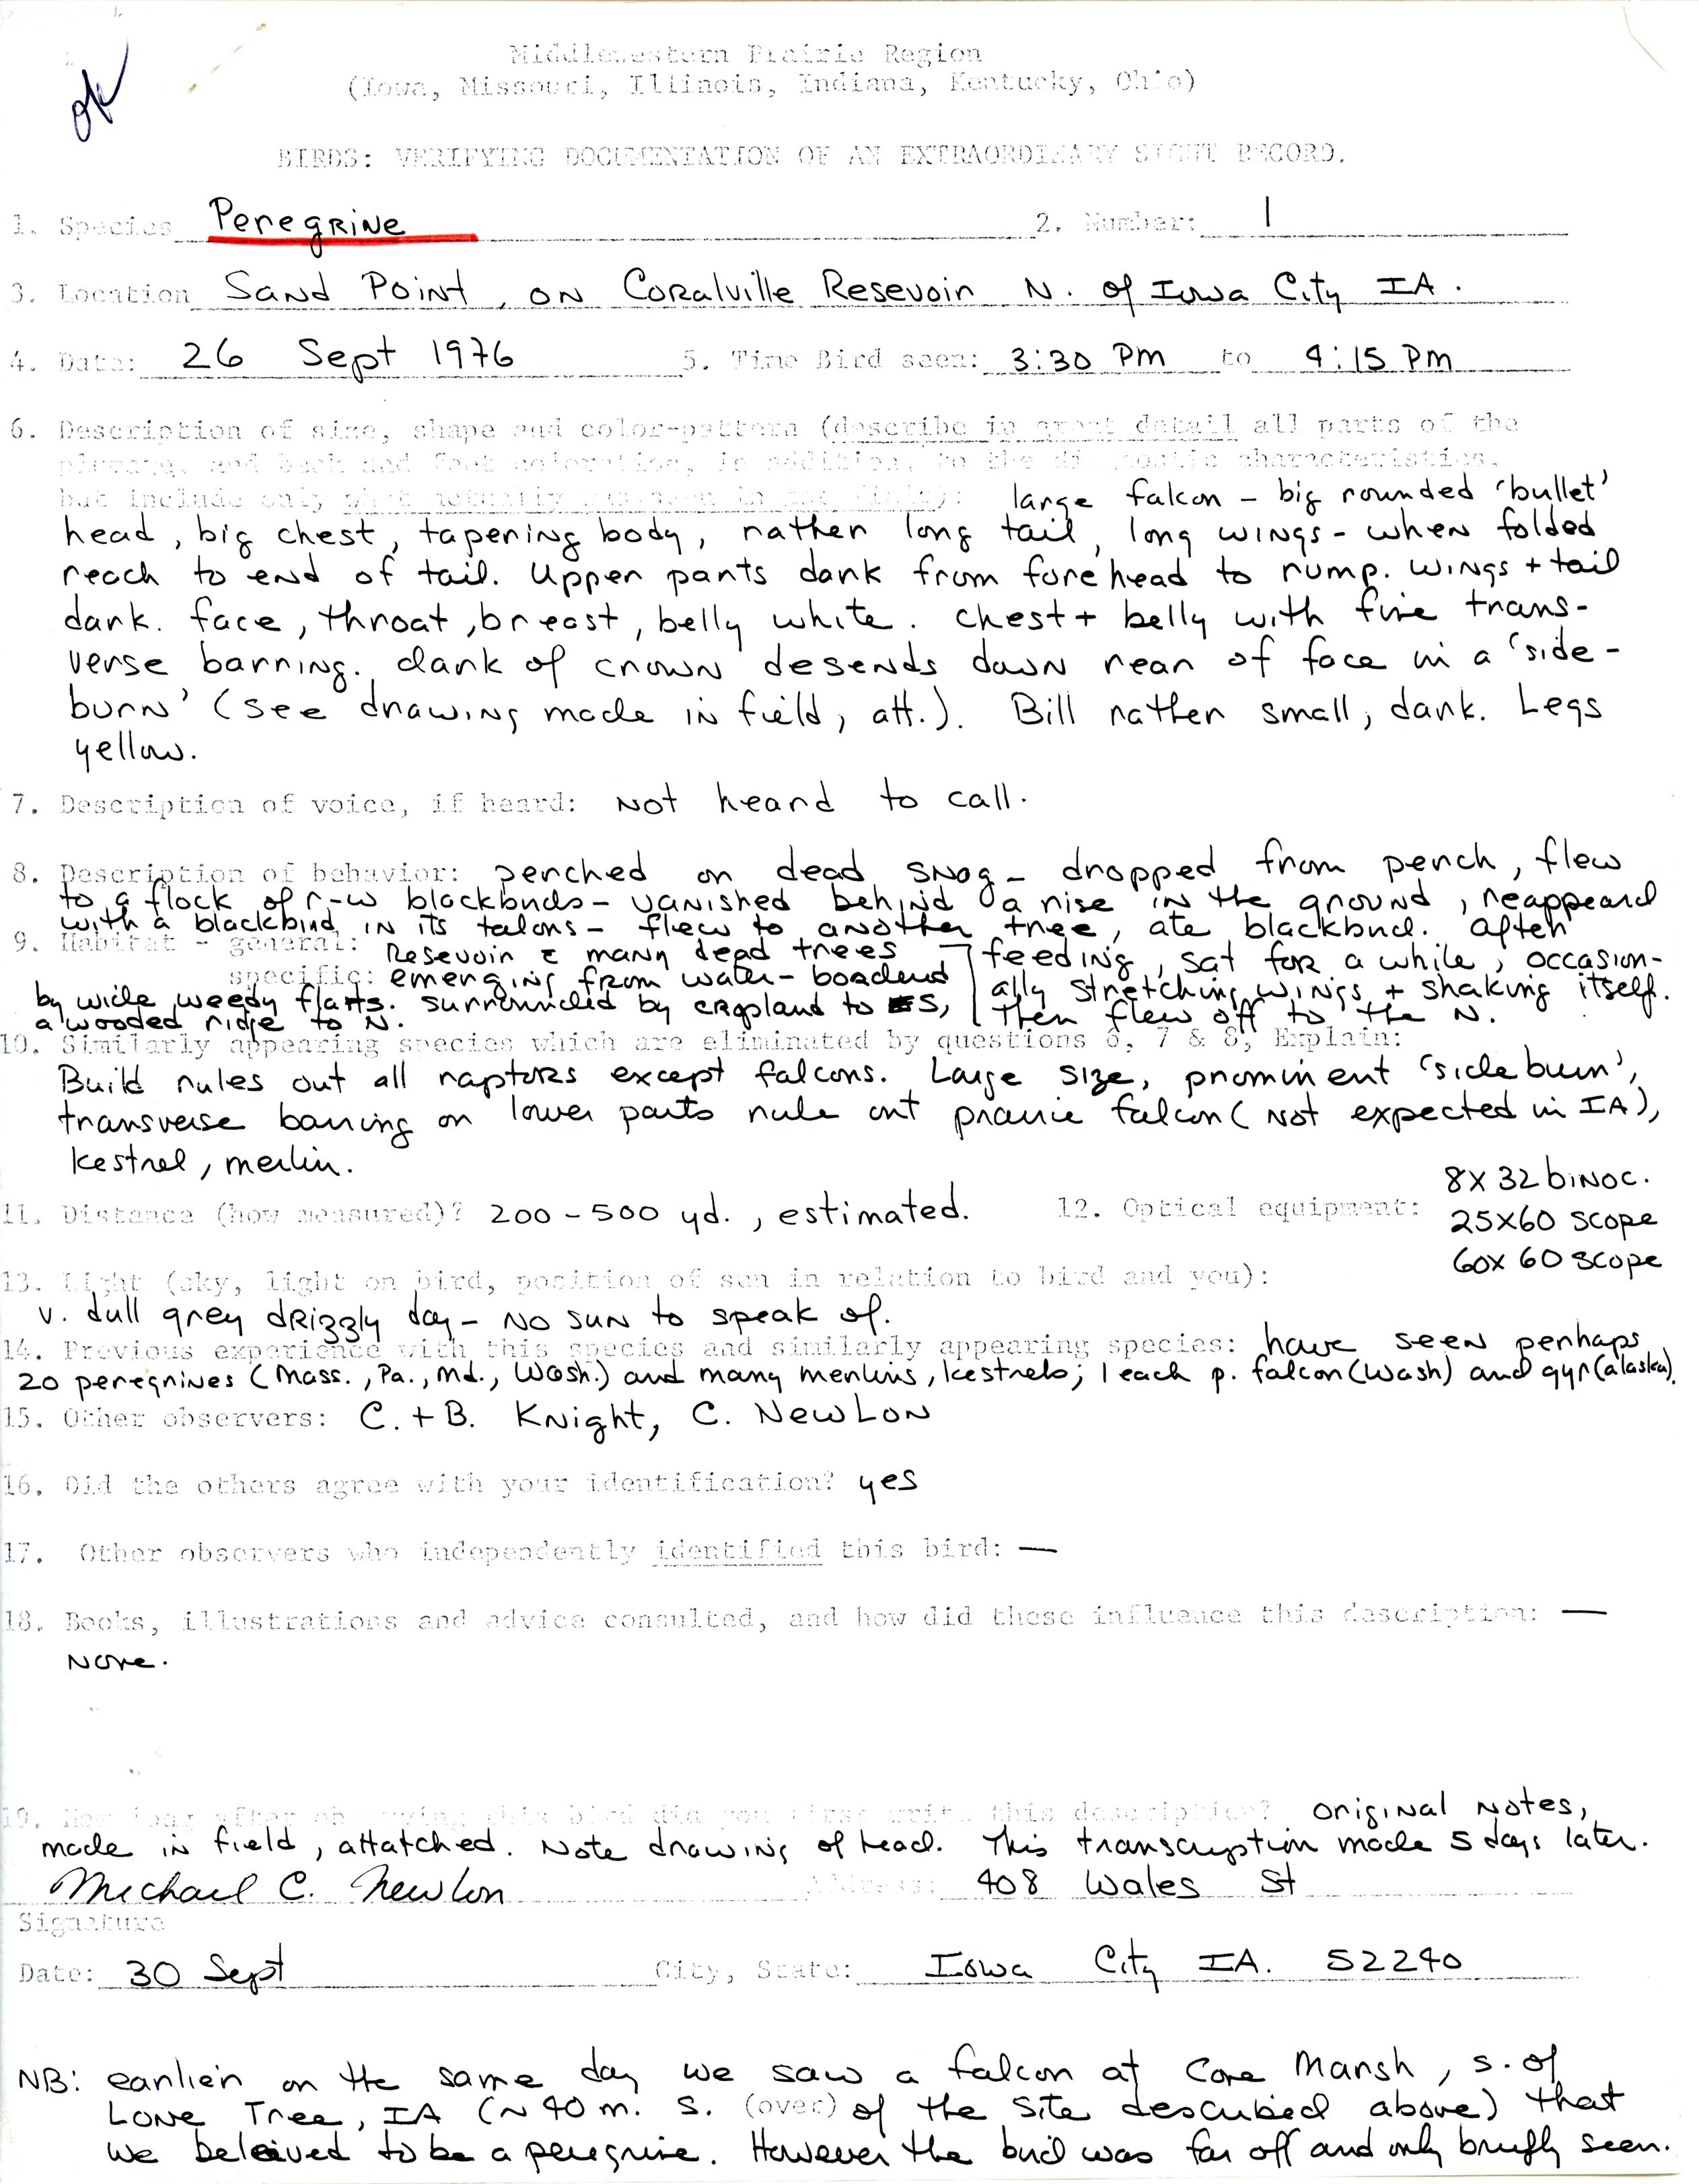 Rare bird documentation form for Peregrine Falcon at Sand Point at Coralville Reservoir, 1976